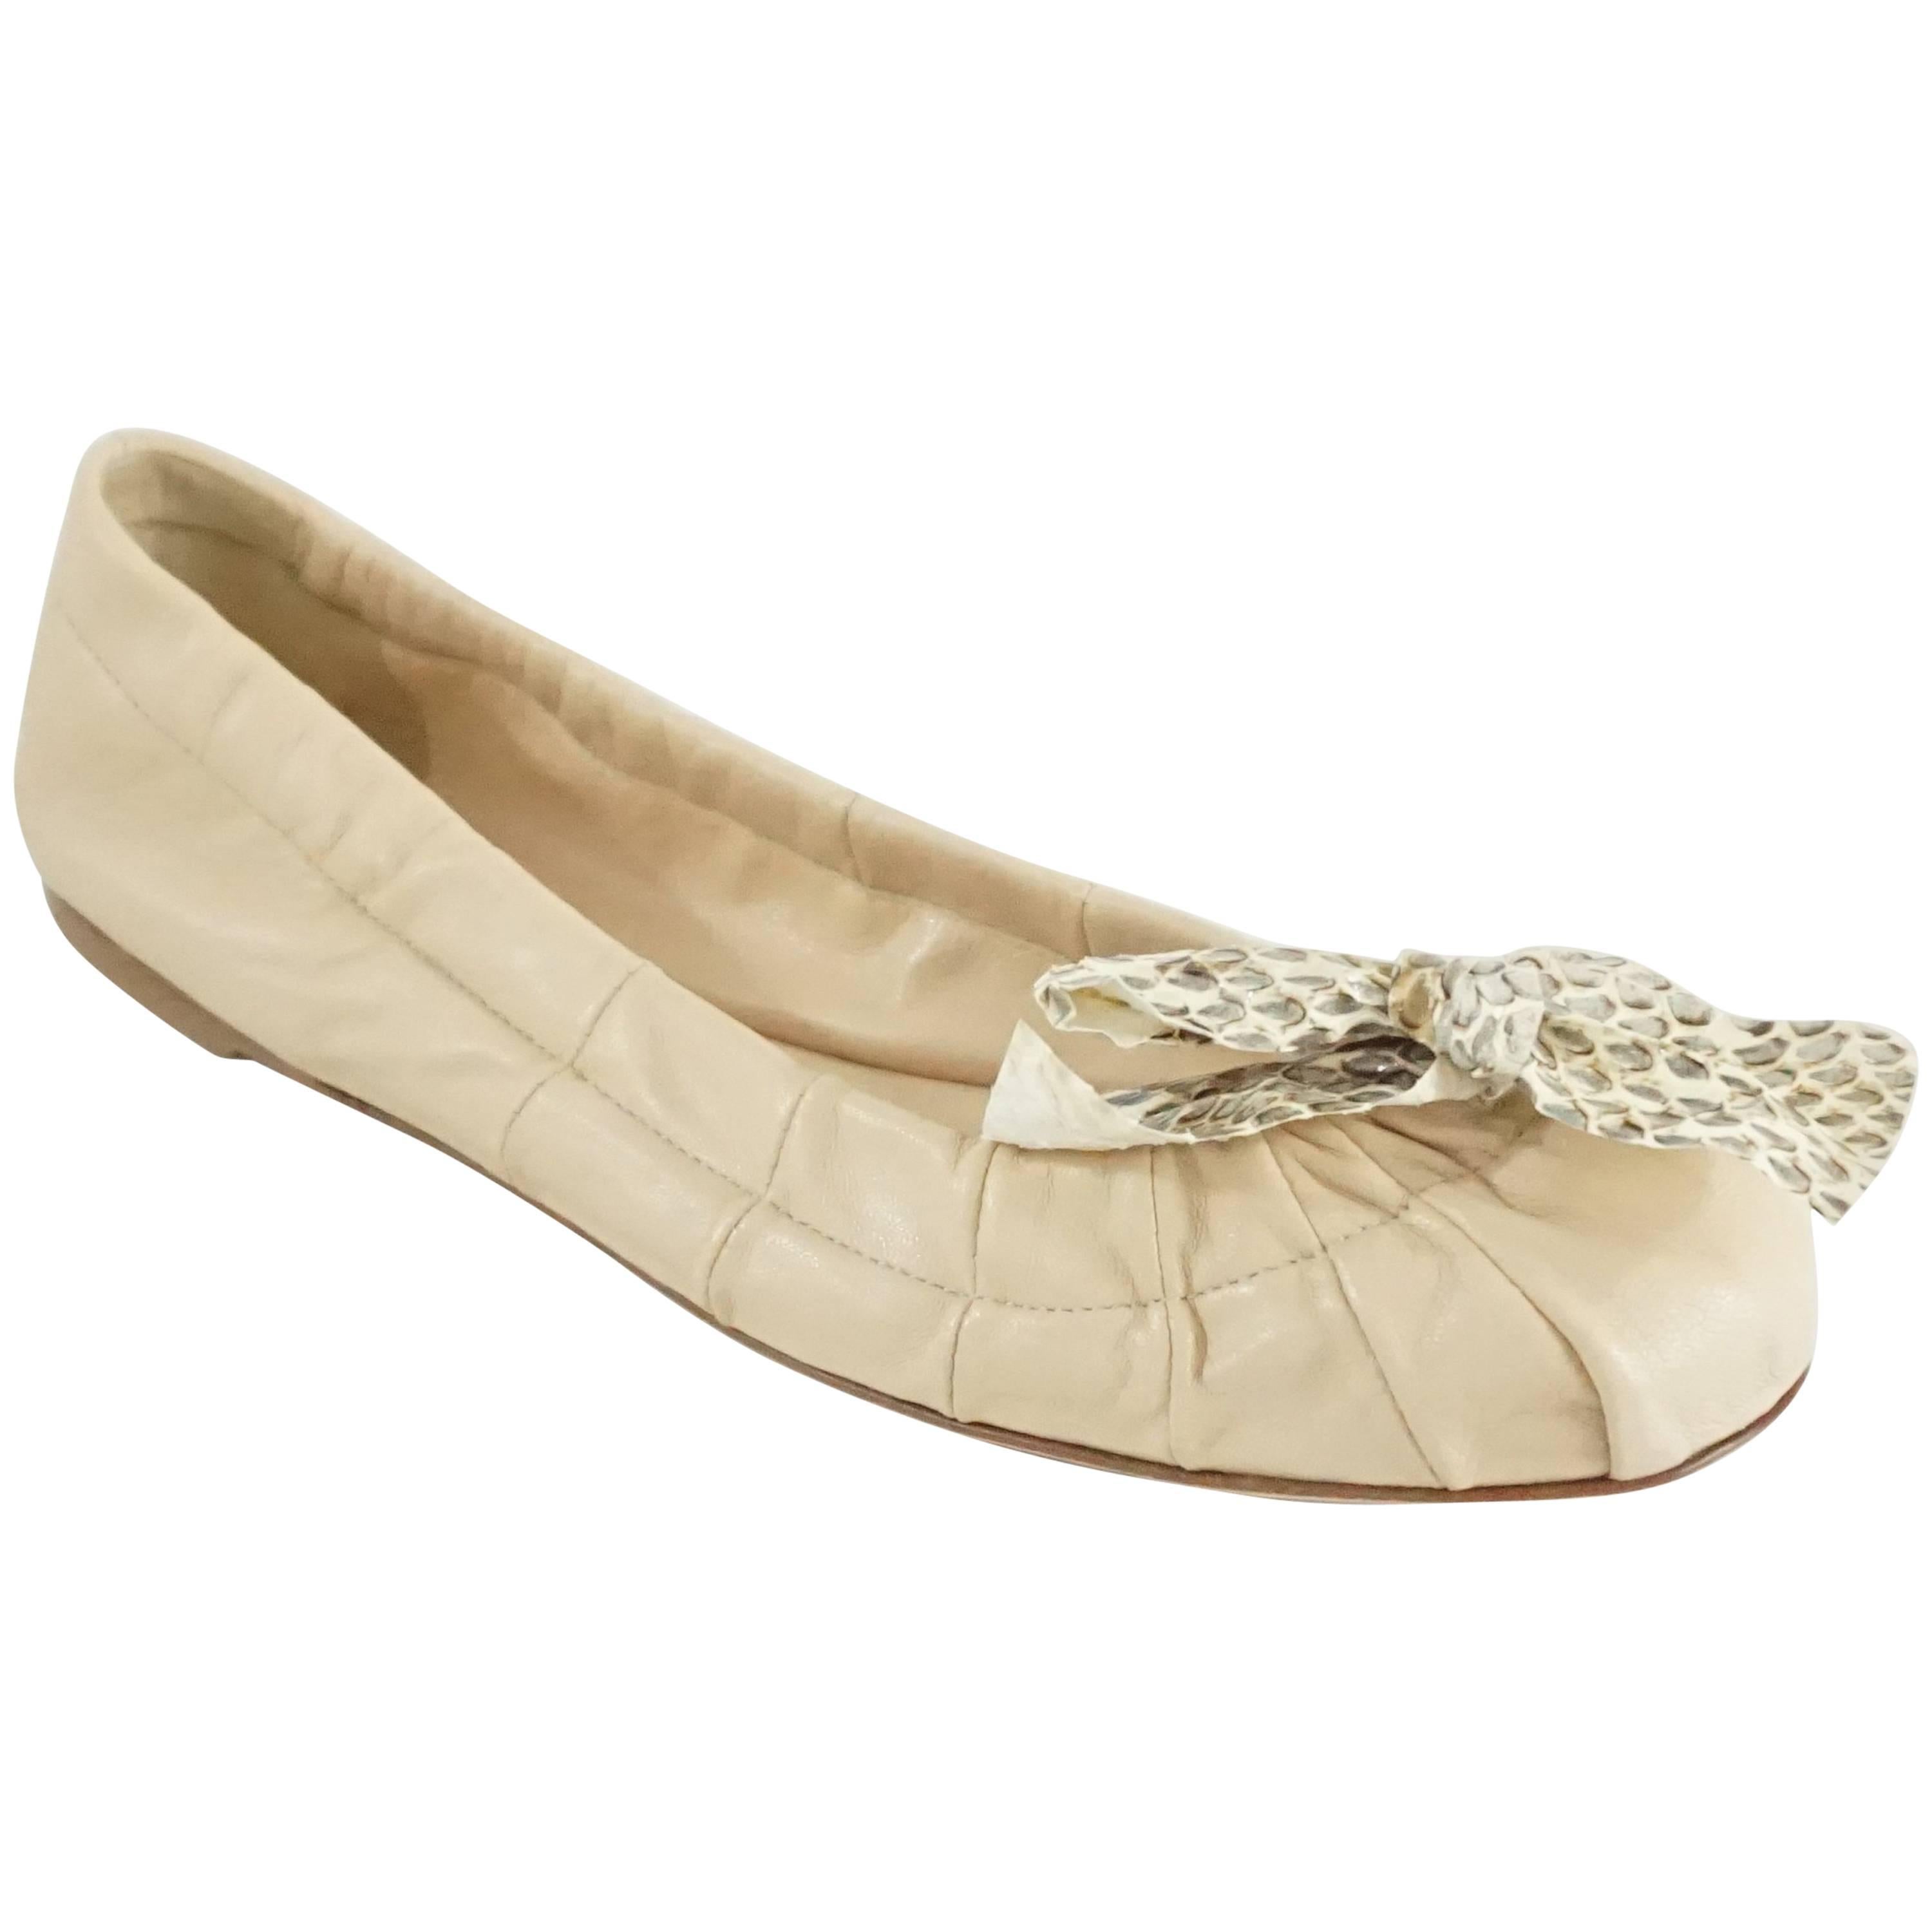 Prada Cream Leather Ballet Flats with Snake Bow – 38